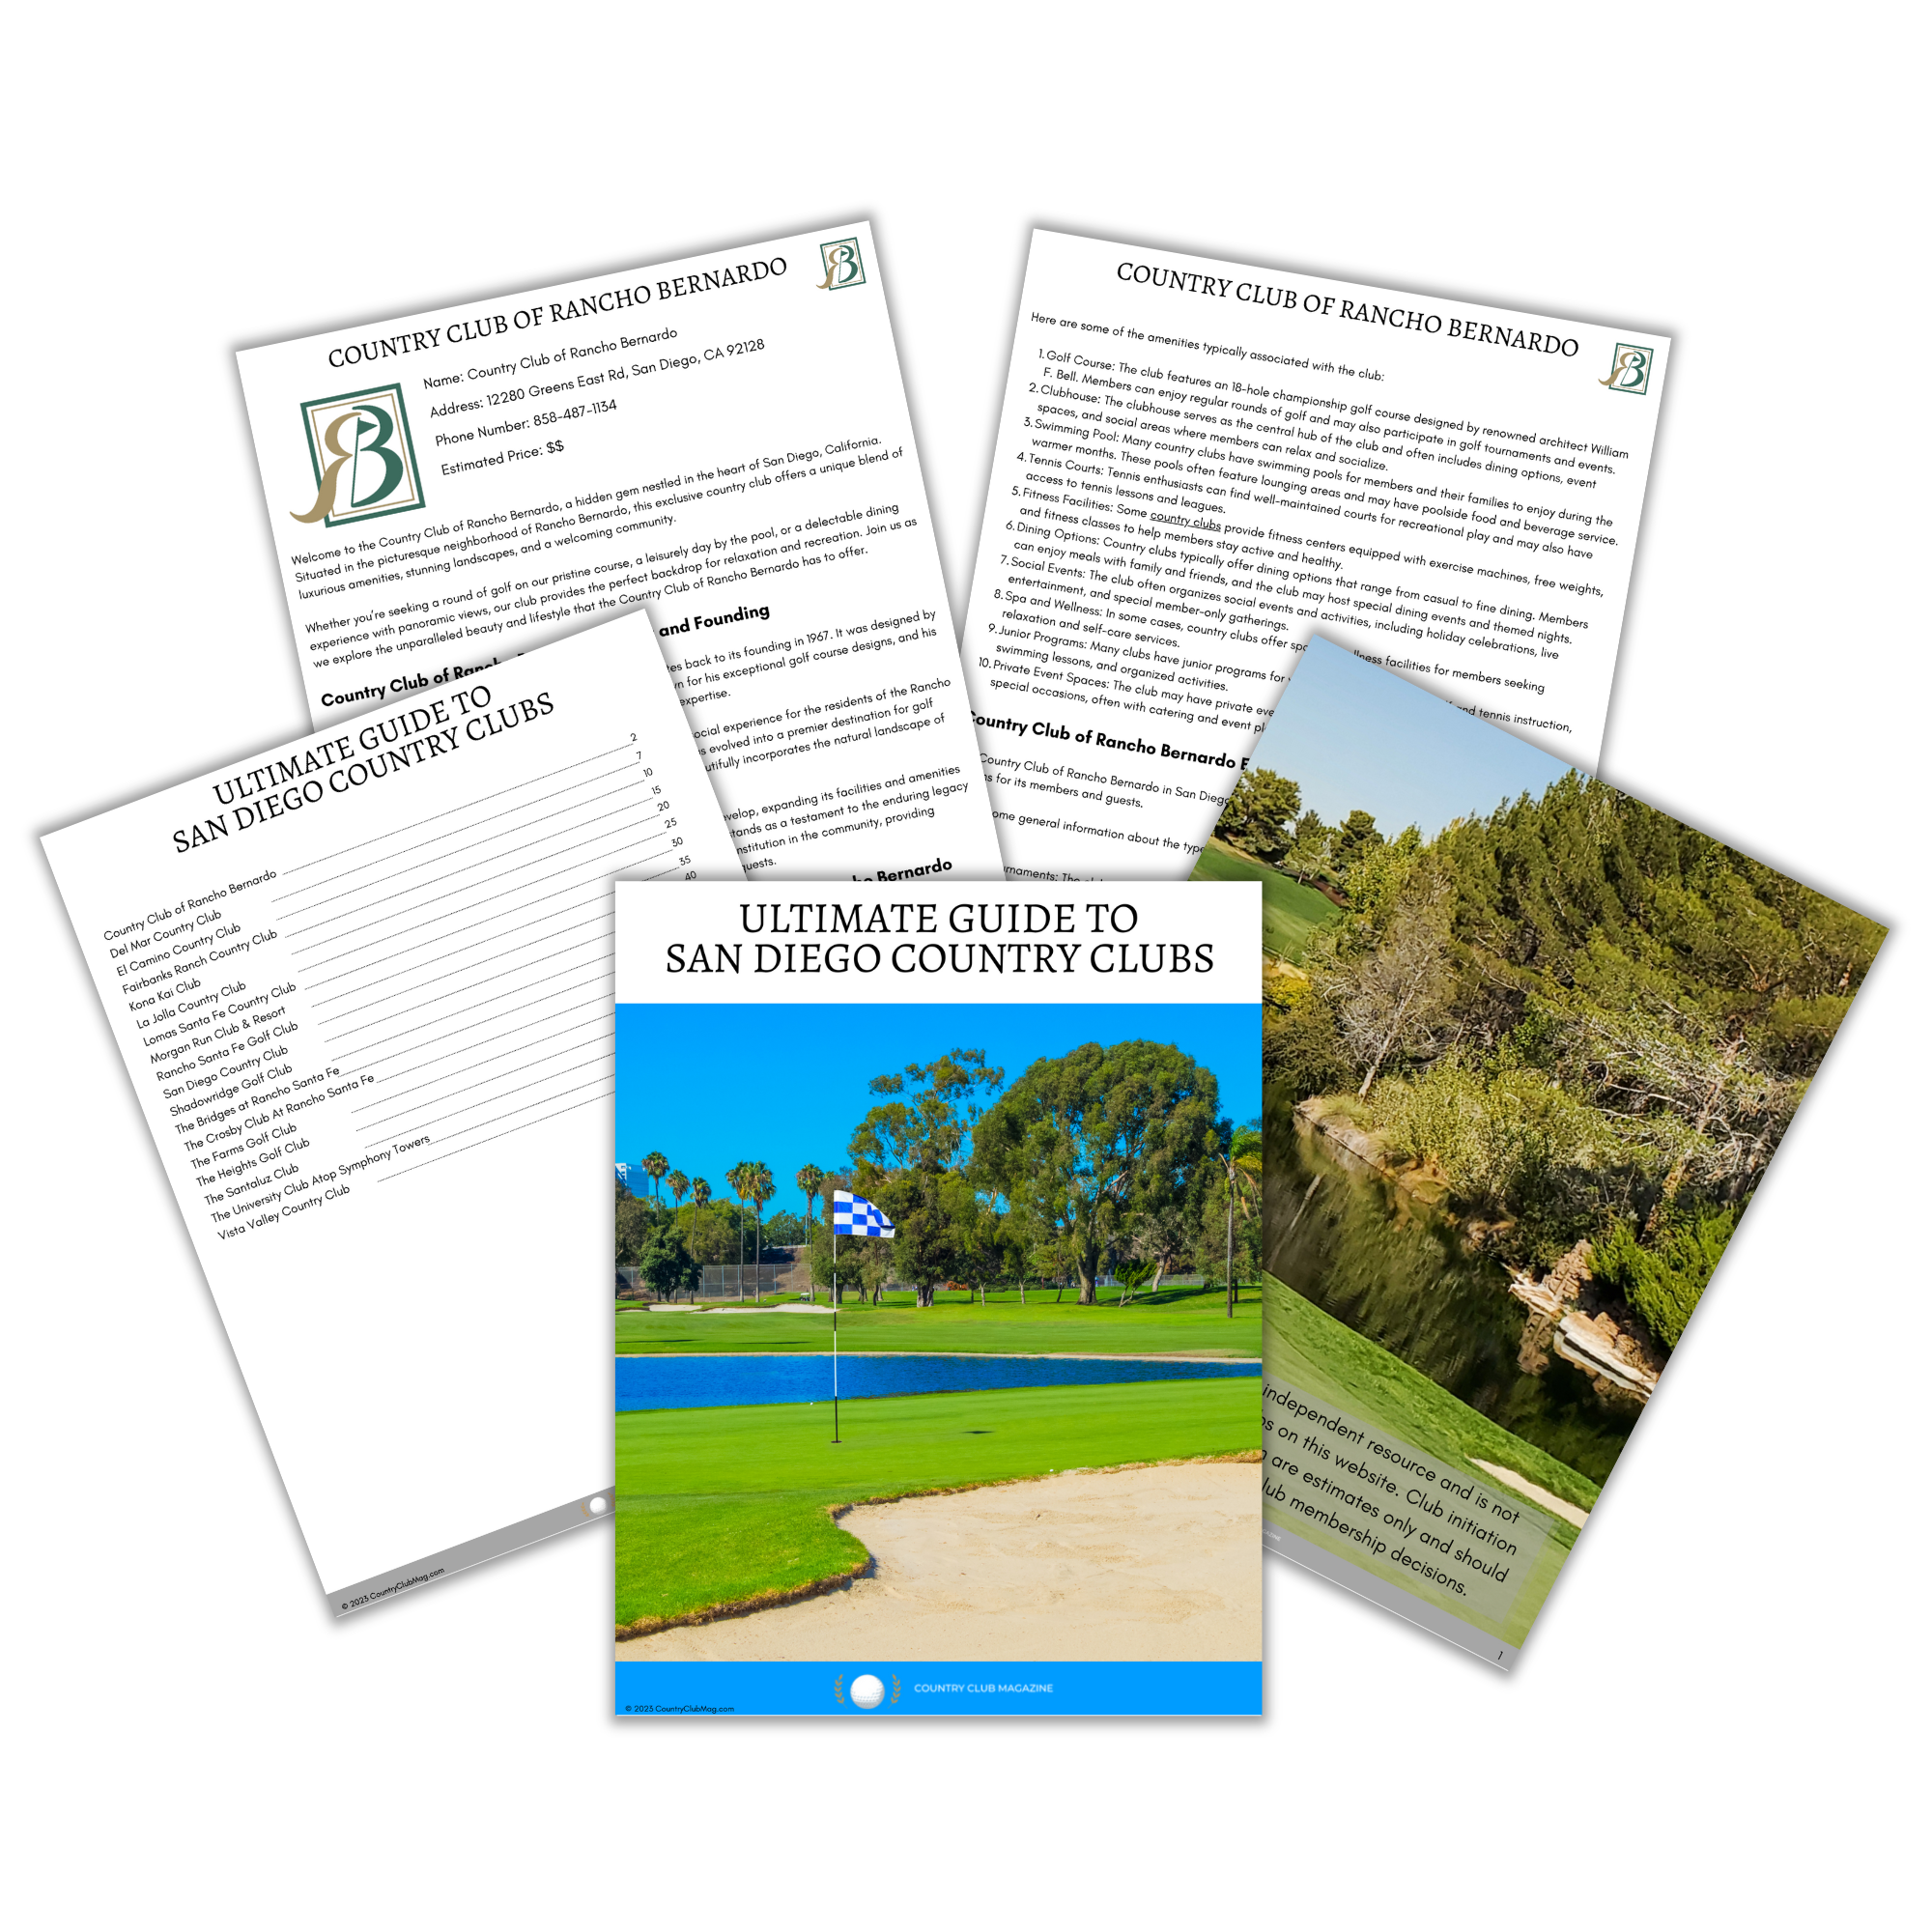 San Diego Country Club Guide